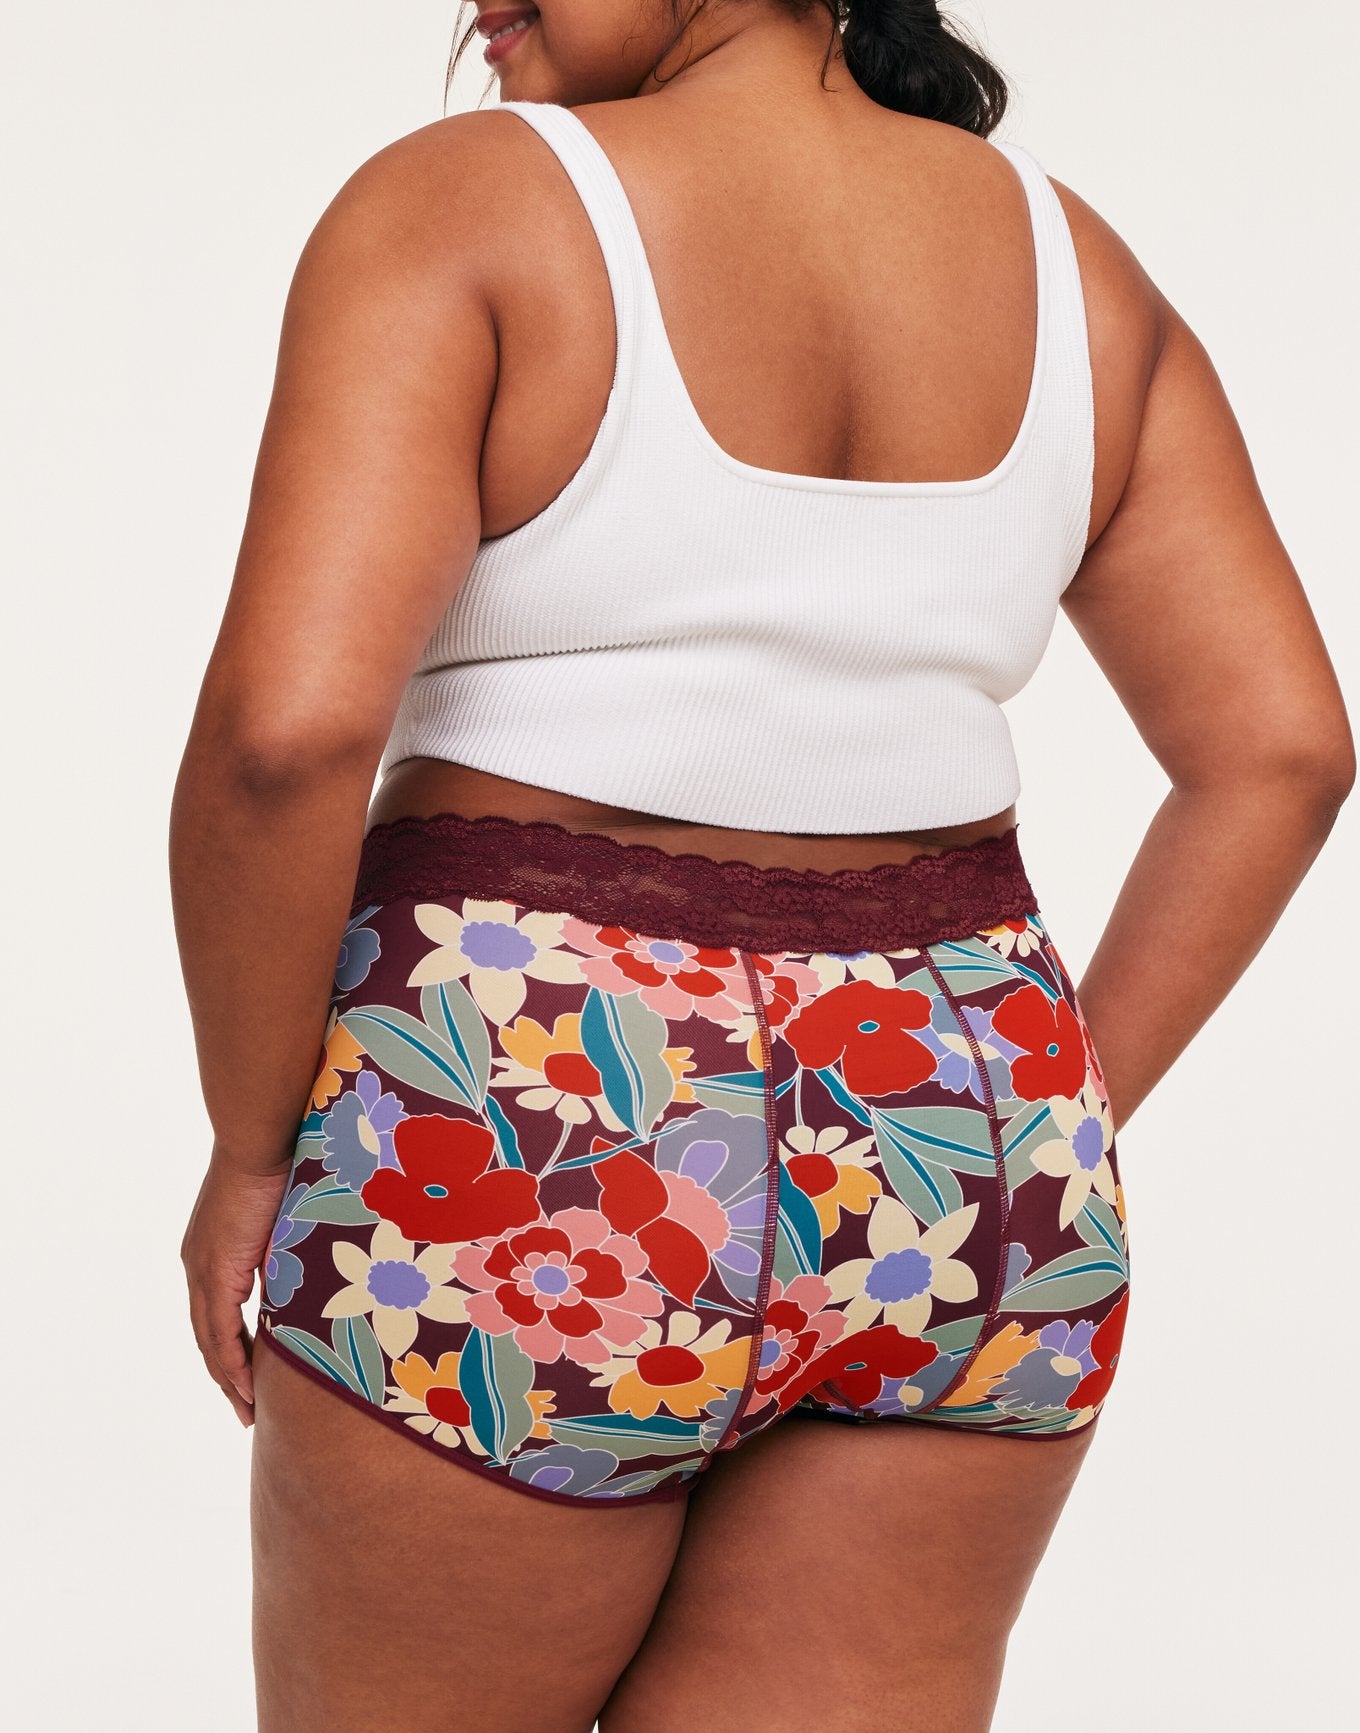 Joyja Emily period-proof panty in color Retro Floral C01 and shape shortie